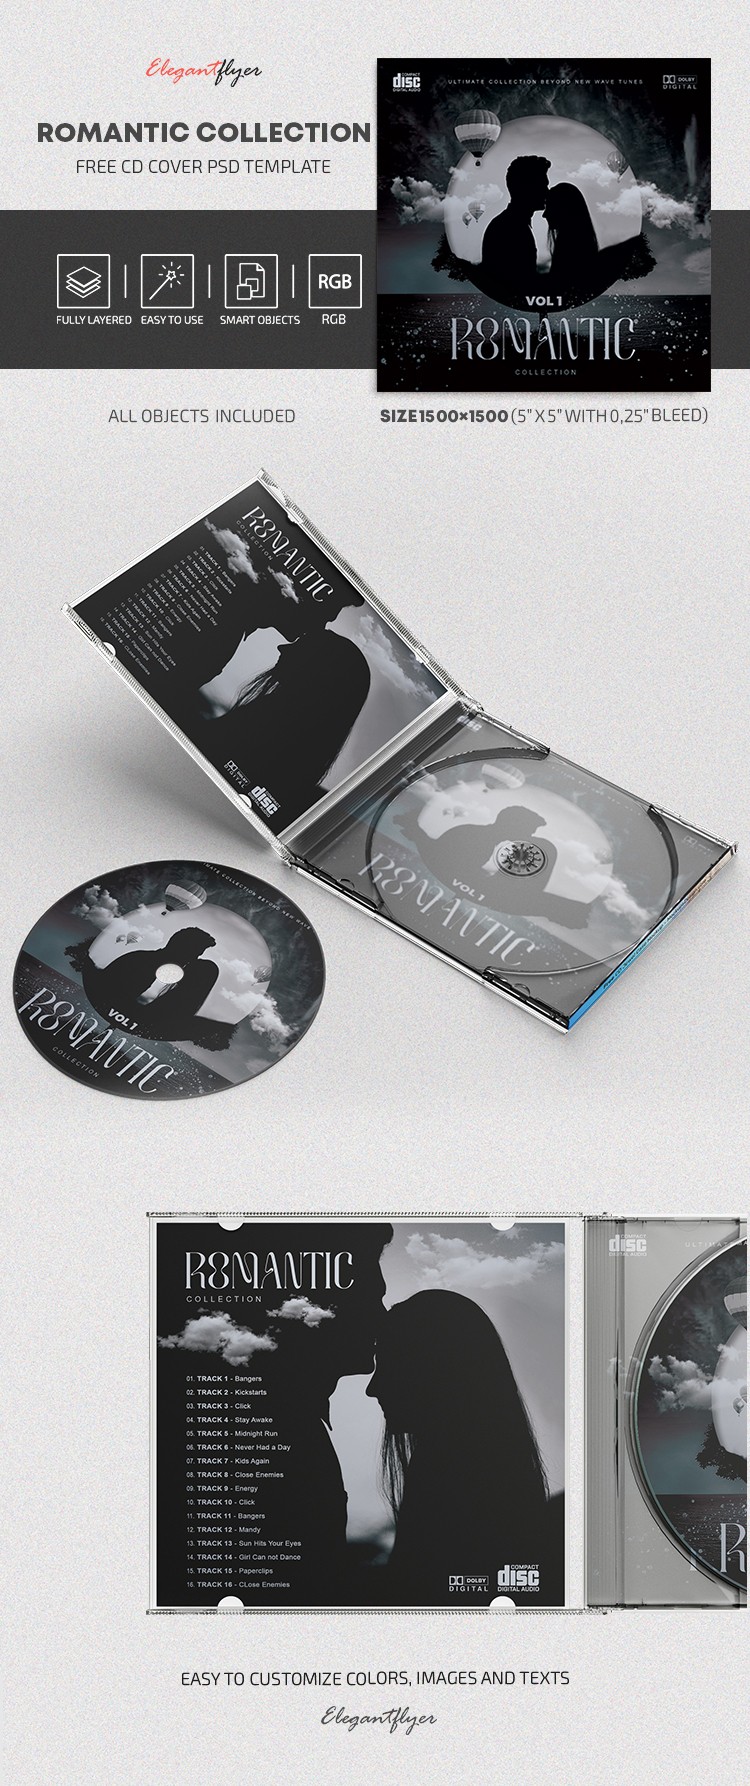 Romantic Collection - Free CD Cover PSD Template by ElegantFlyer